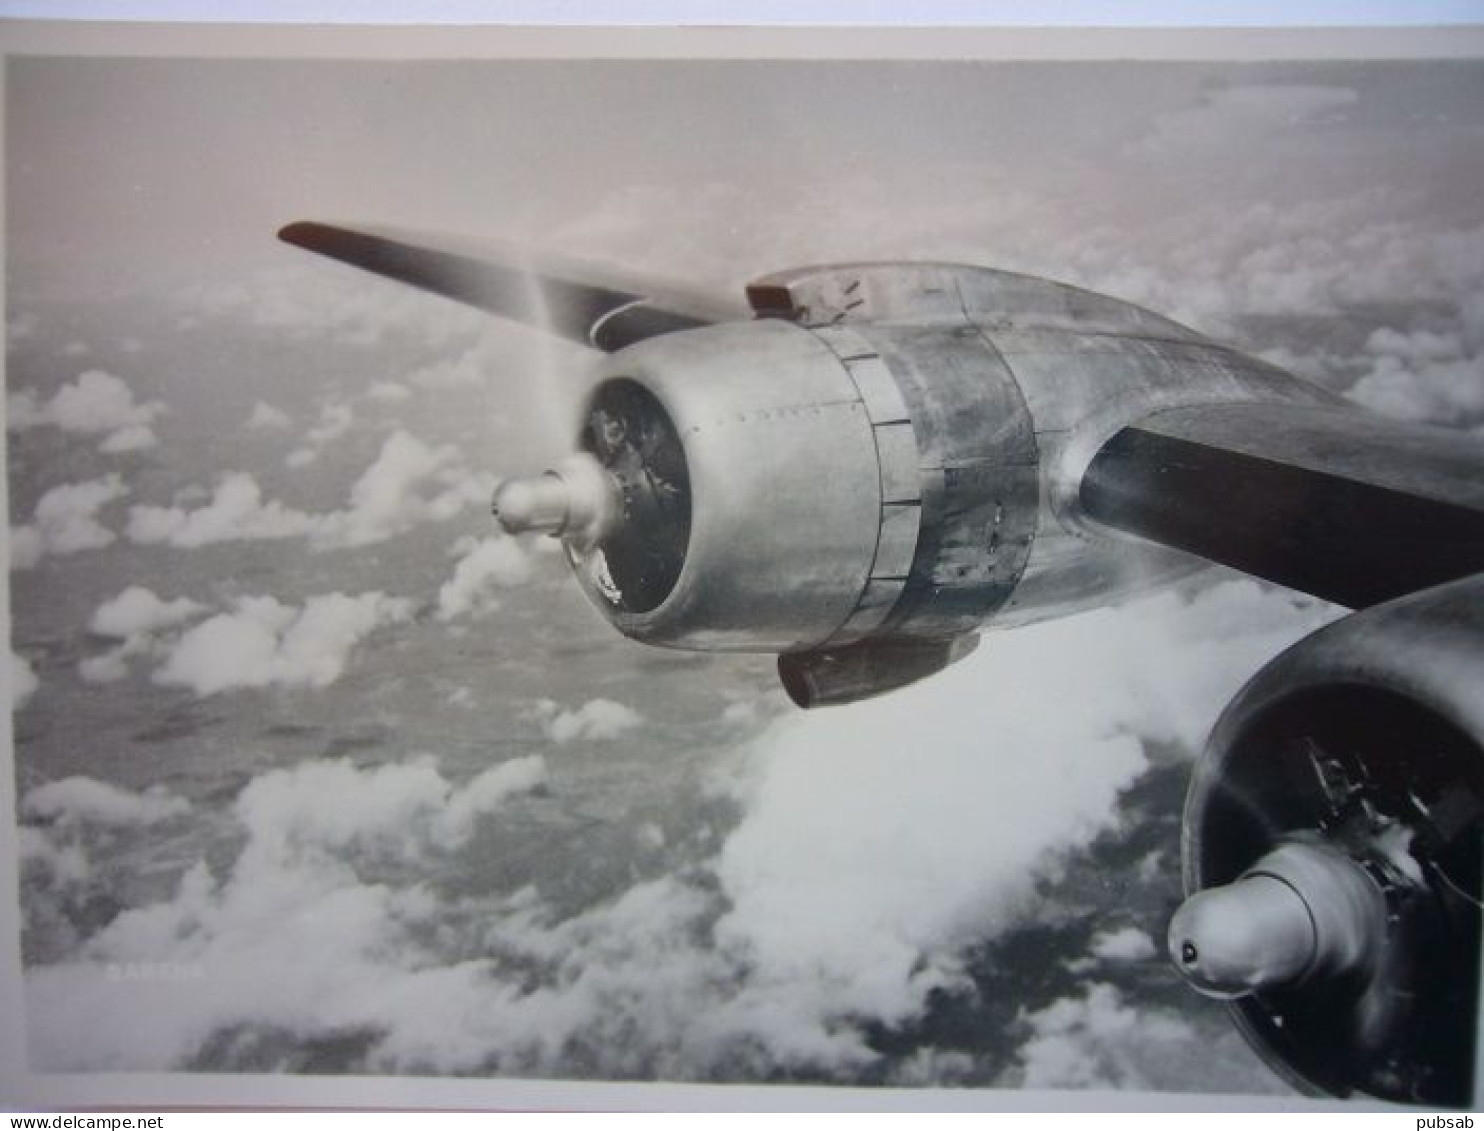 Avion / Airplane / SABENA / Douglas DC-6 / Above The Clouds / Airline Issue - 1946-....: Ere Moderne